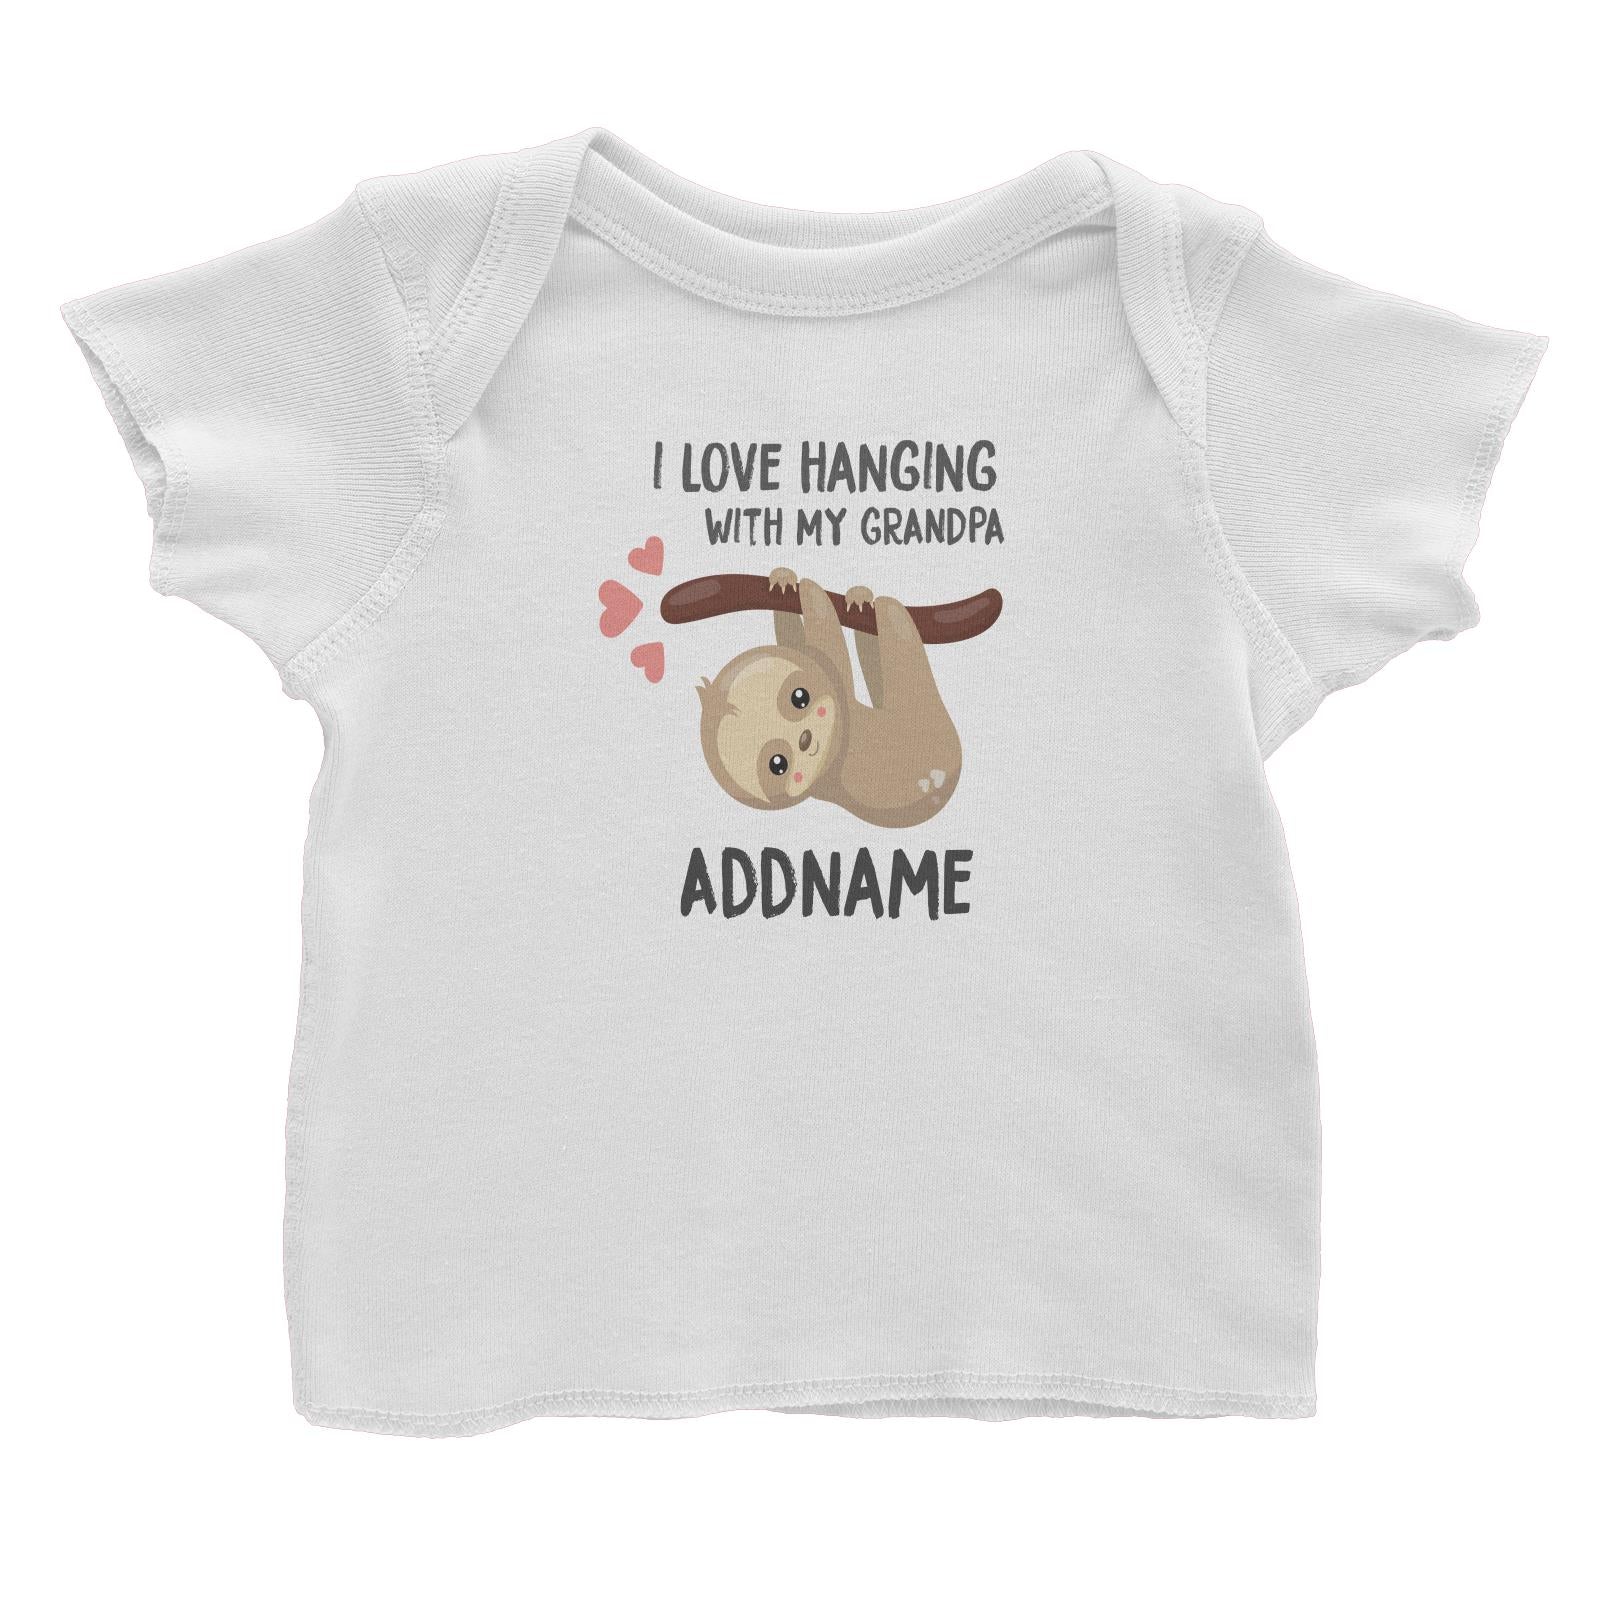 Cute Sloth I Love Hanging With My Grandpa Addname Baby T-Shirt